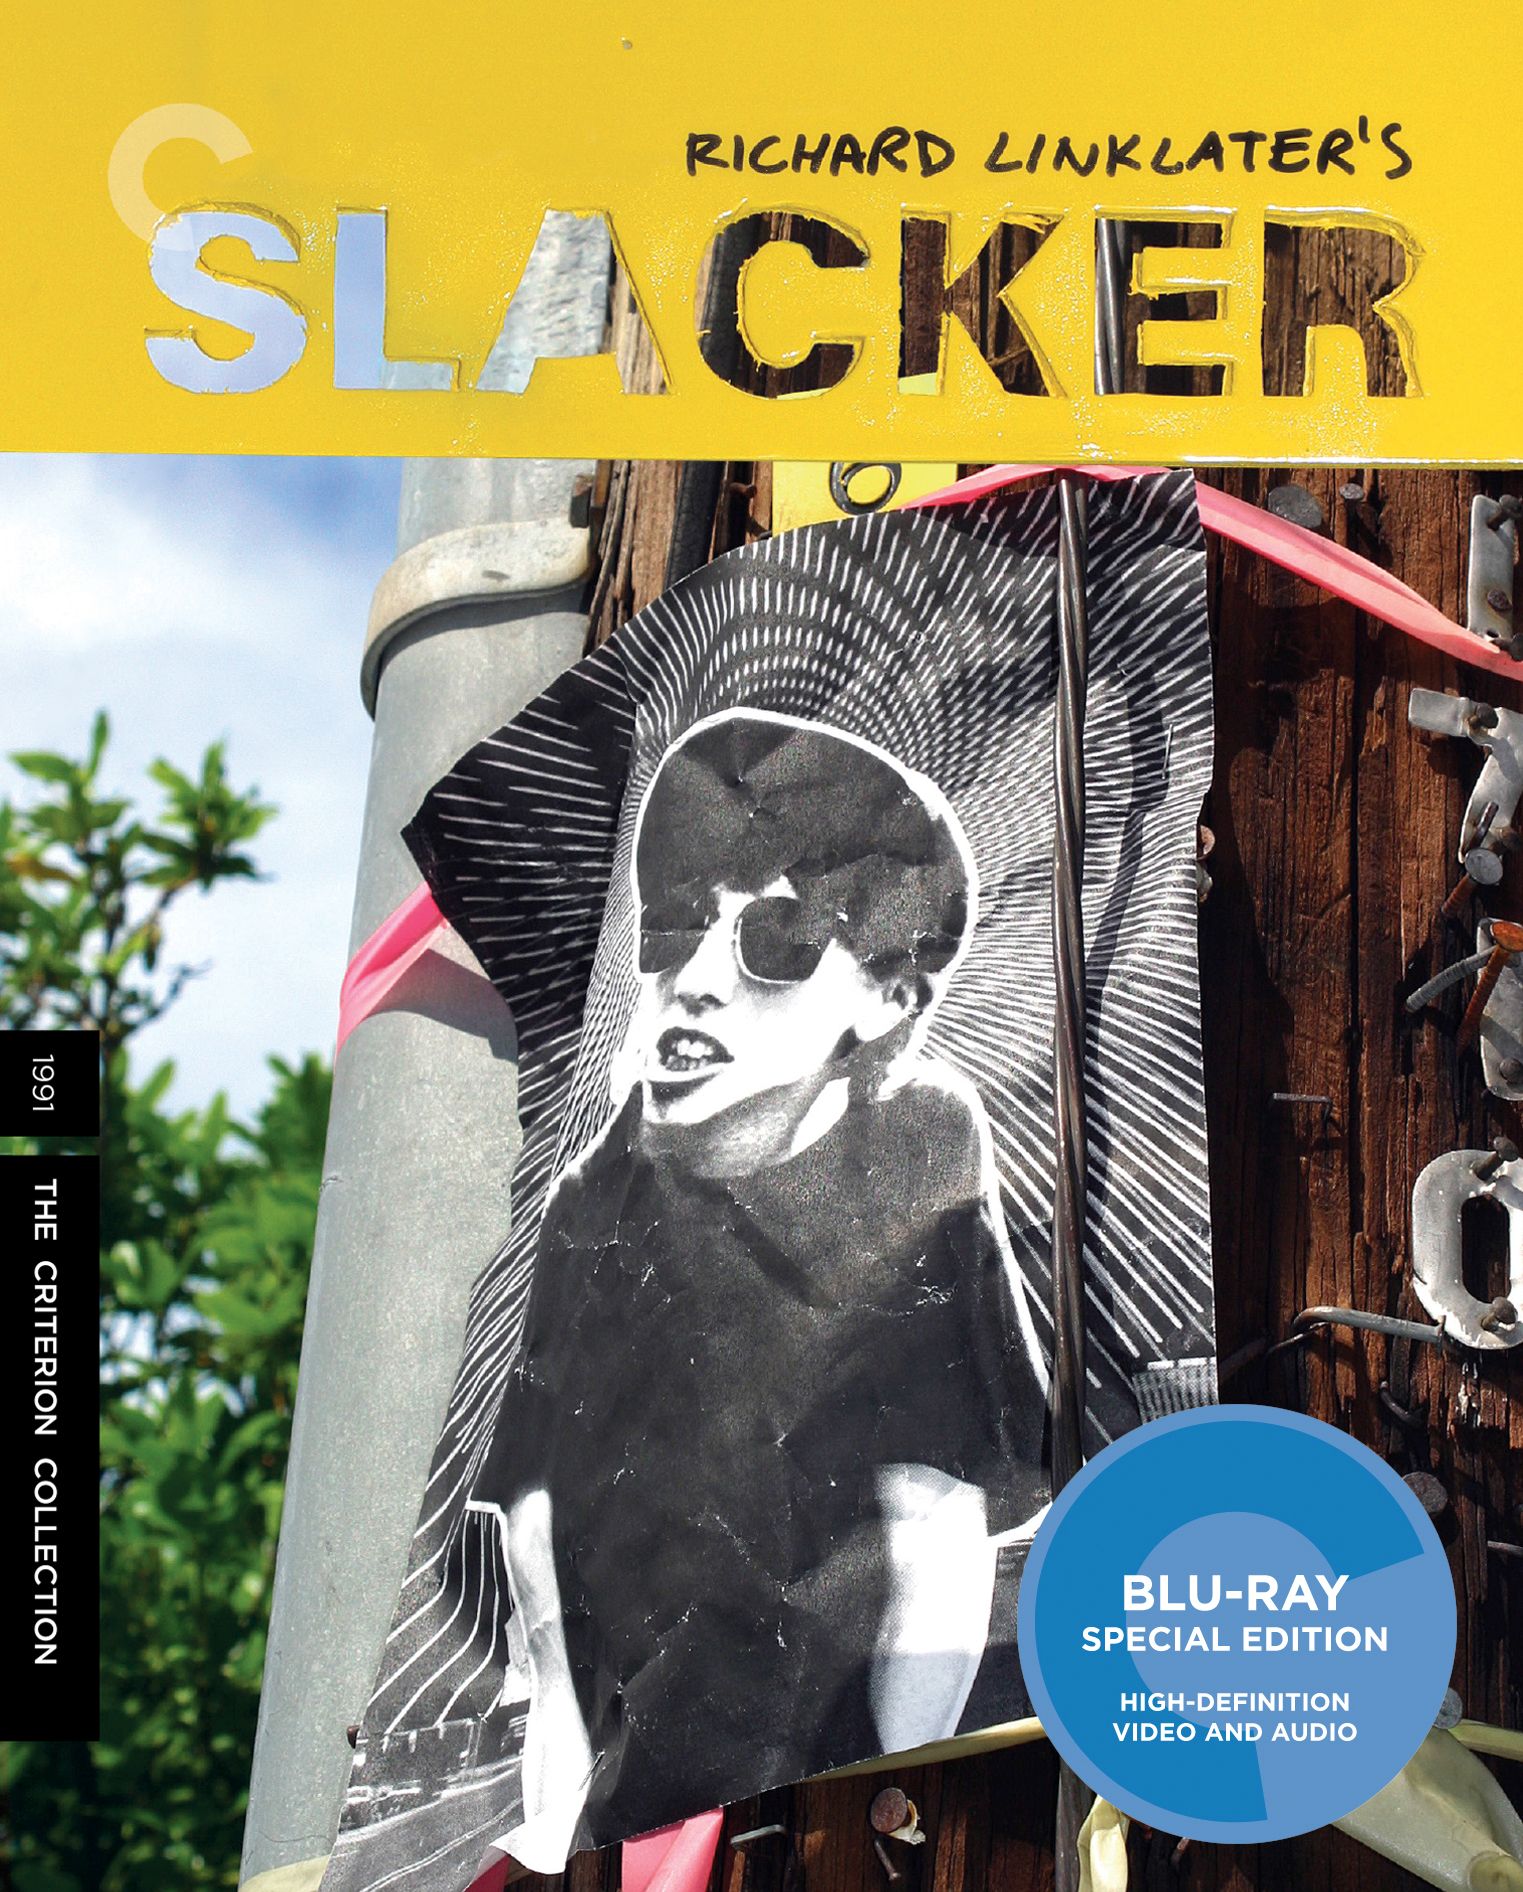 Slacker [Criterion Collection] [Blu-ray] [1991] - Best Buy